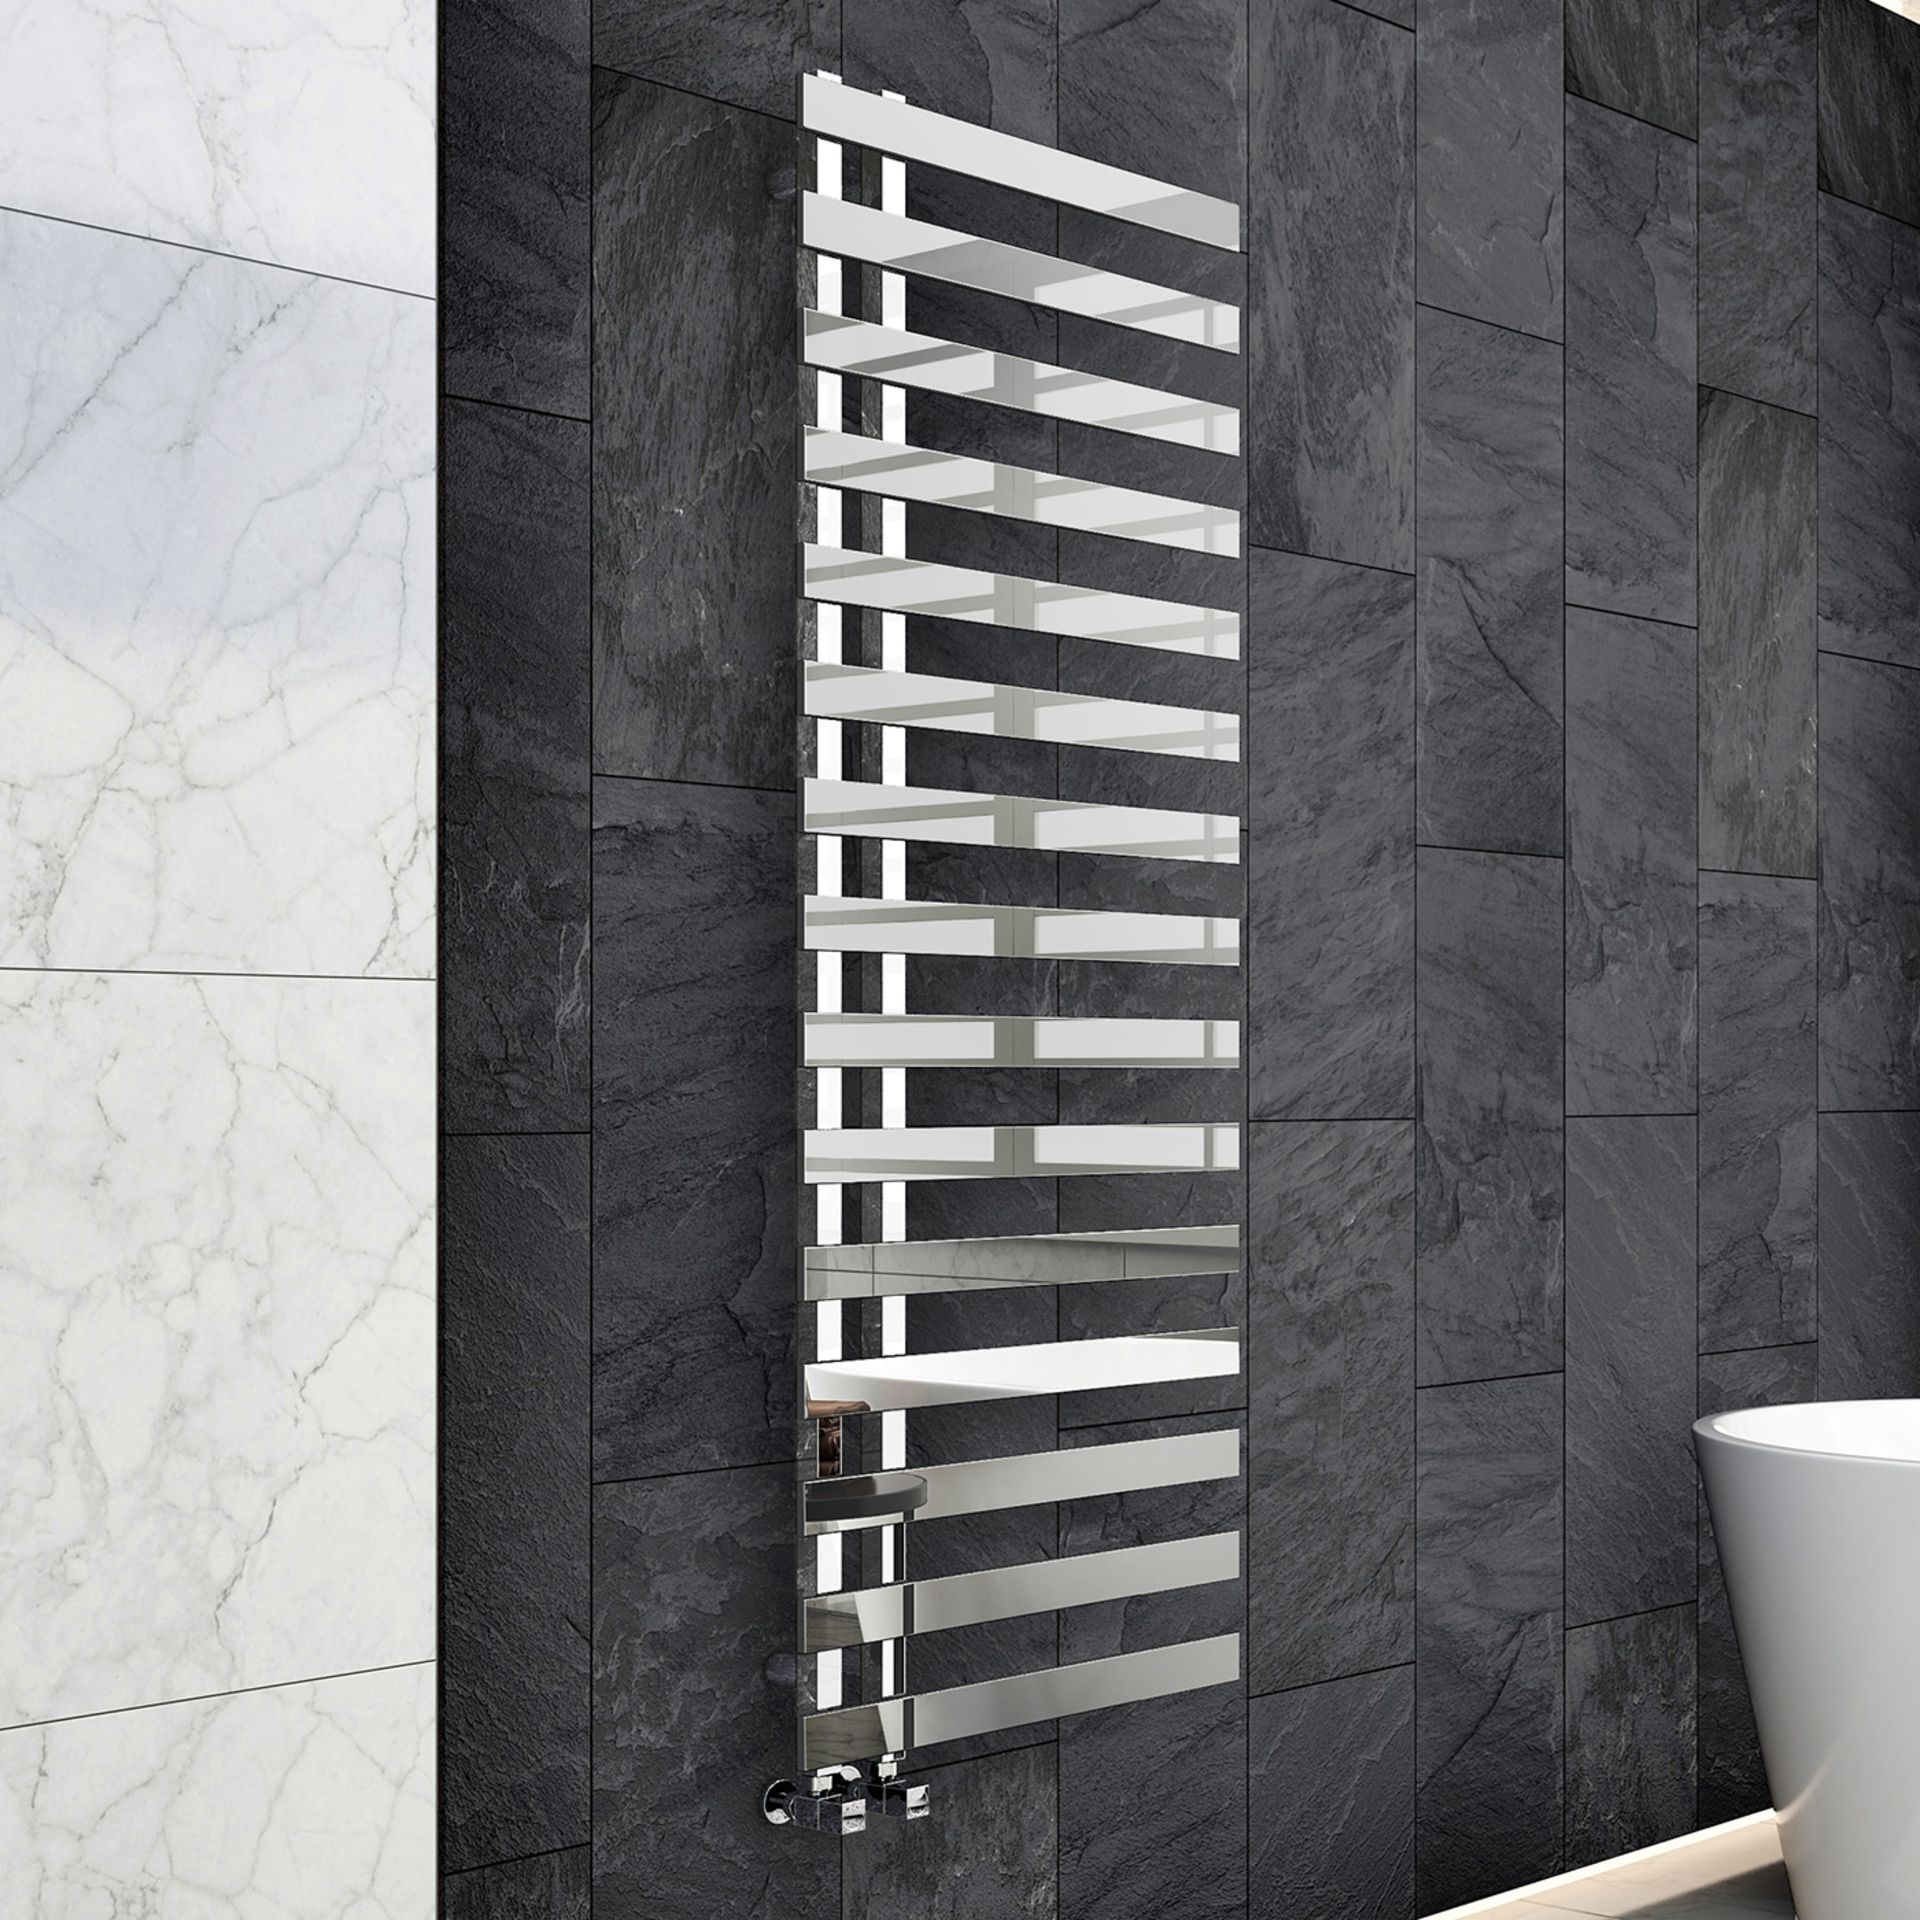 AA60- 1569x600mm Stainless Steel Designer Towel Radiator - Polished Finish. RRP £499.99 We bring you